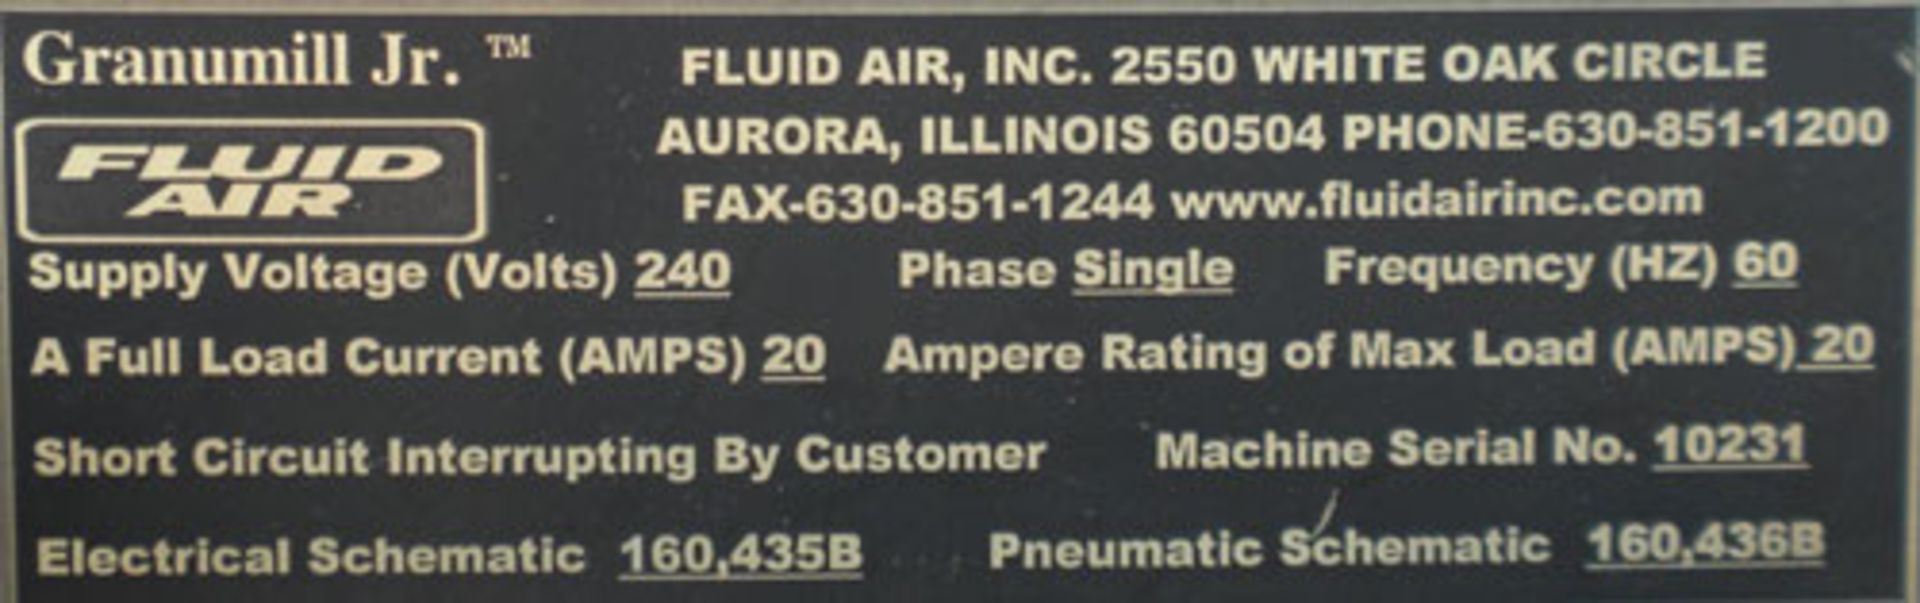 Used- Fluid Air Granumill Jr. For Cannabis and Hemp 316 Stainless Steel - Image 14 of 14